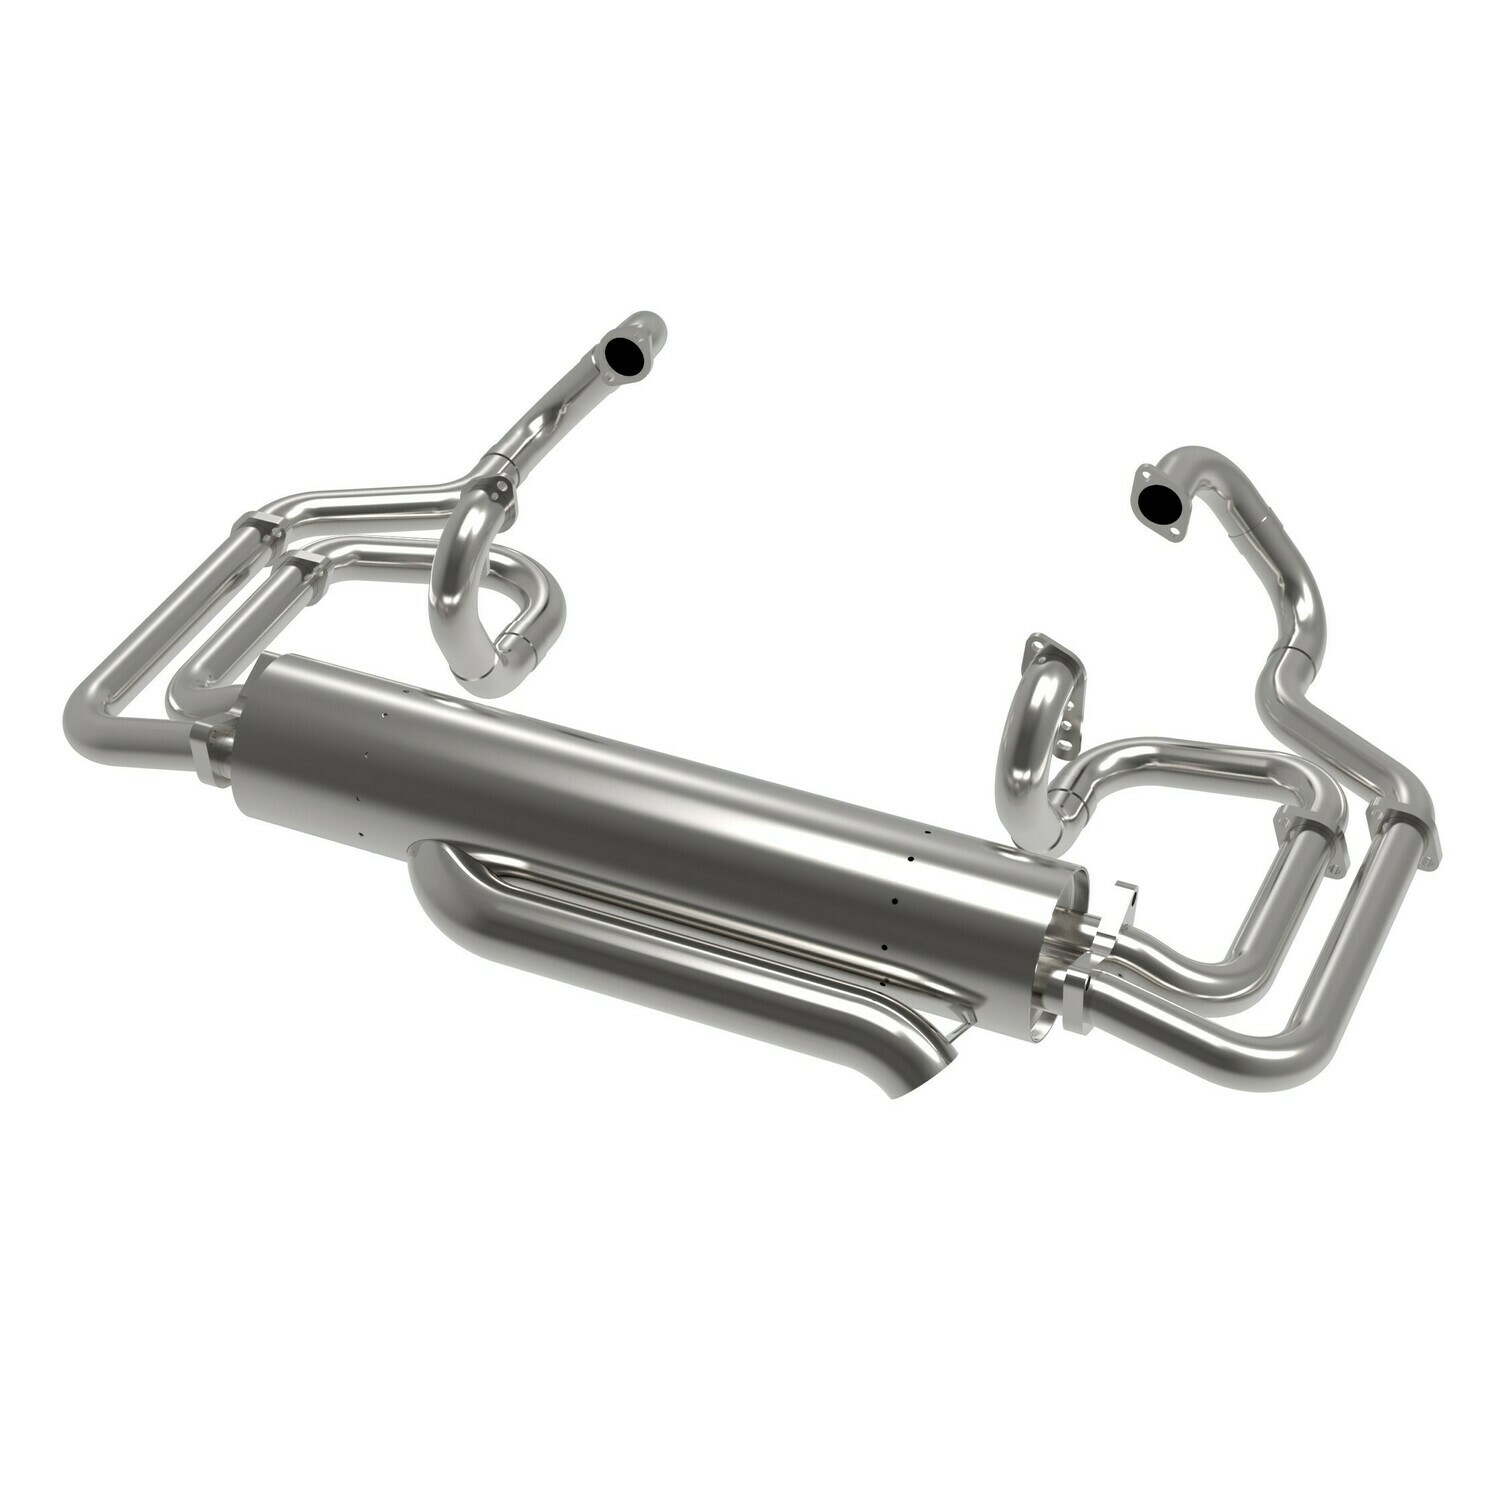 38MM SUPER SPORT EL SS143 EXHAUST SYSTEMS BAYWINDOW T2 BUS with Type 1 Engine